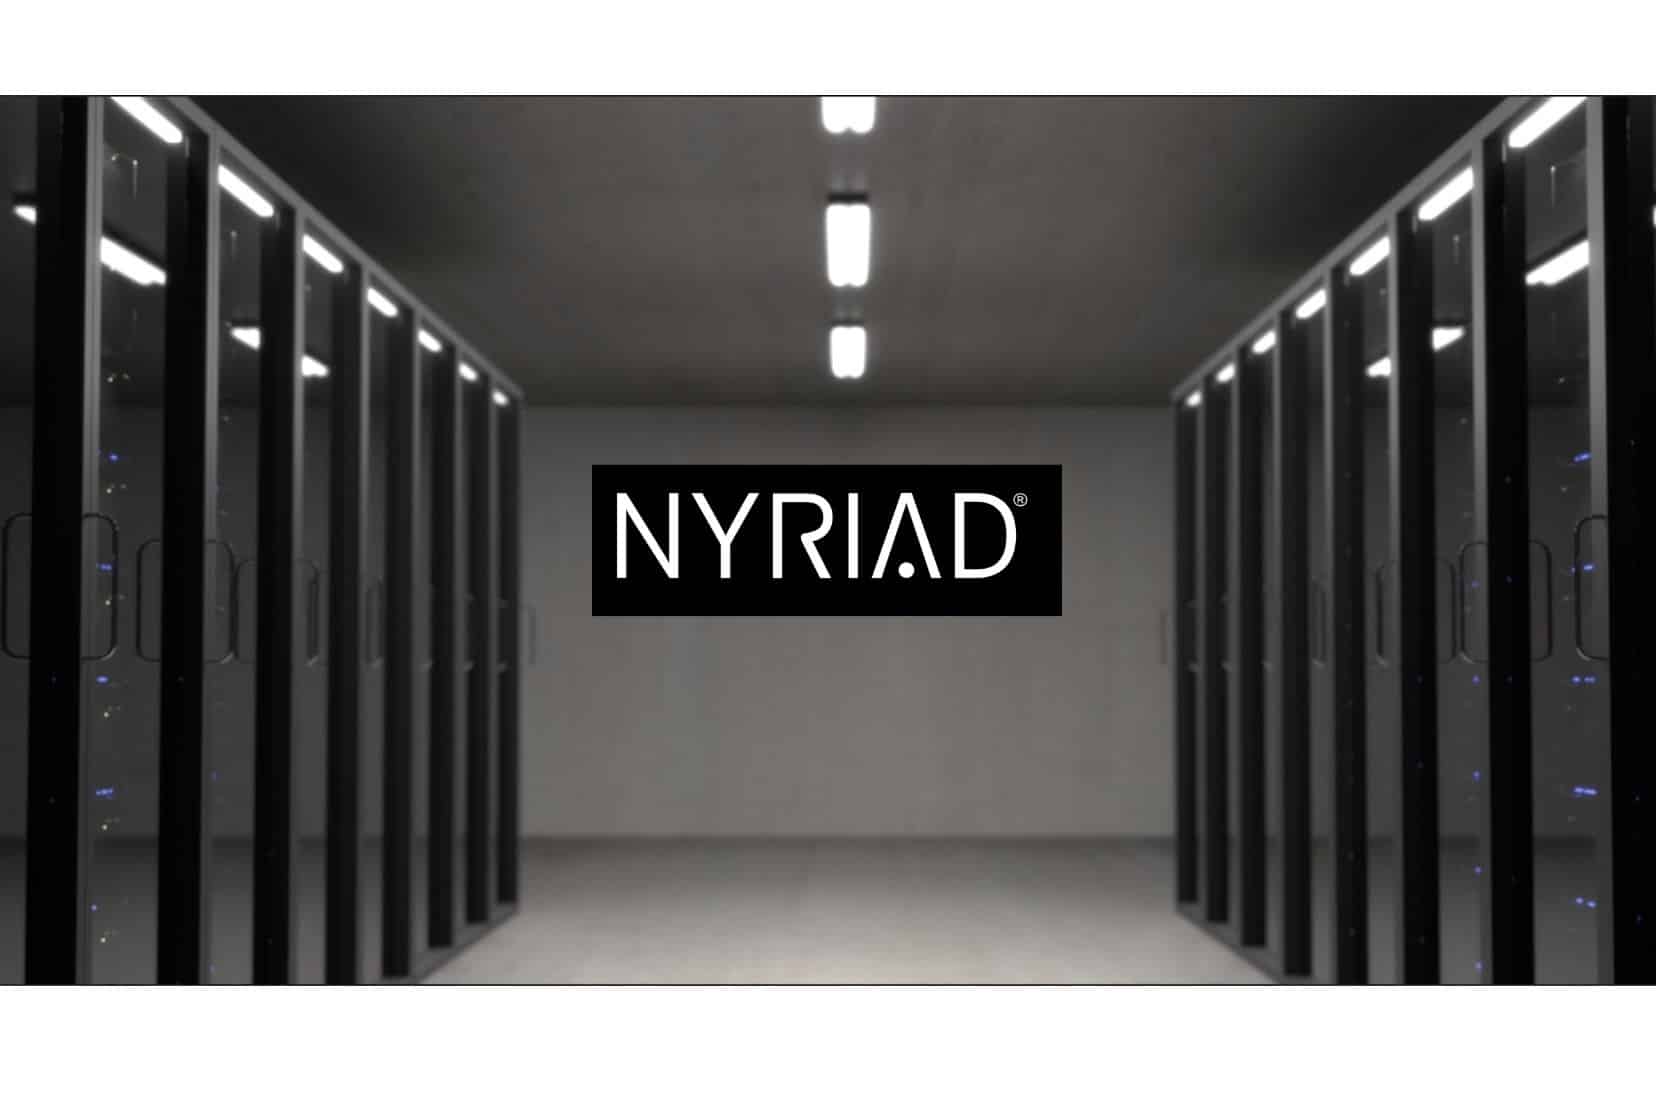 Nyriad is relying on OpenBOM to develop the next generation of internet technologies